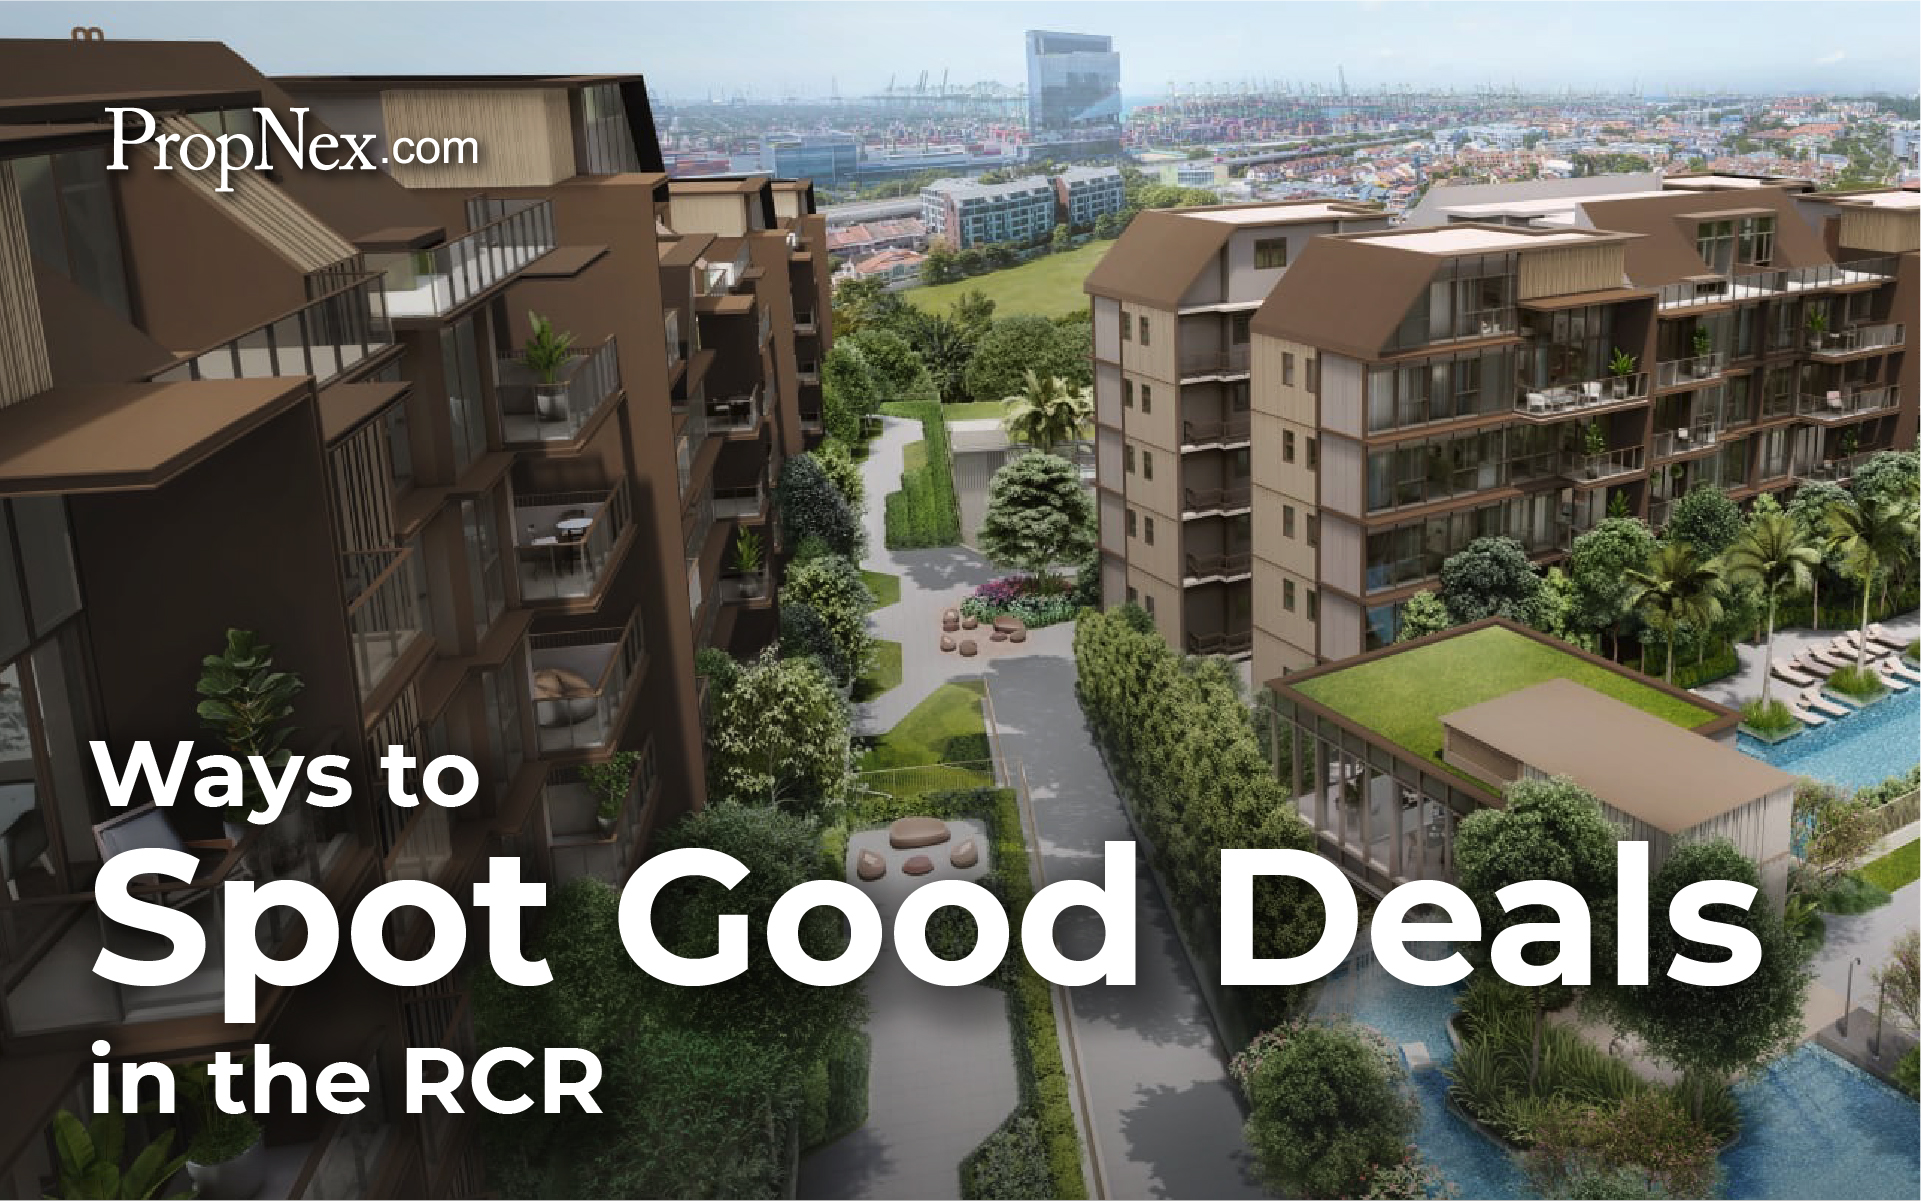 Ways to spot good deals in the RCR